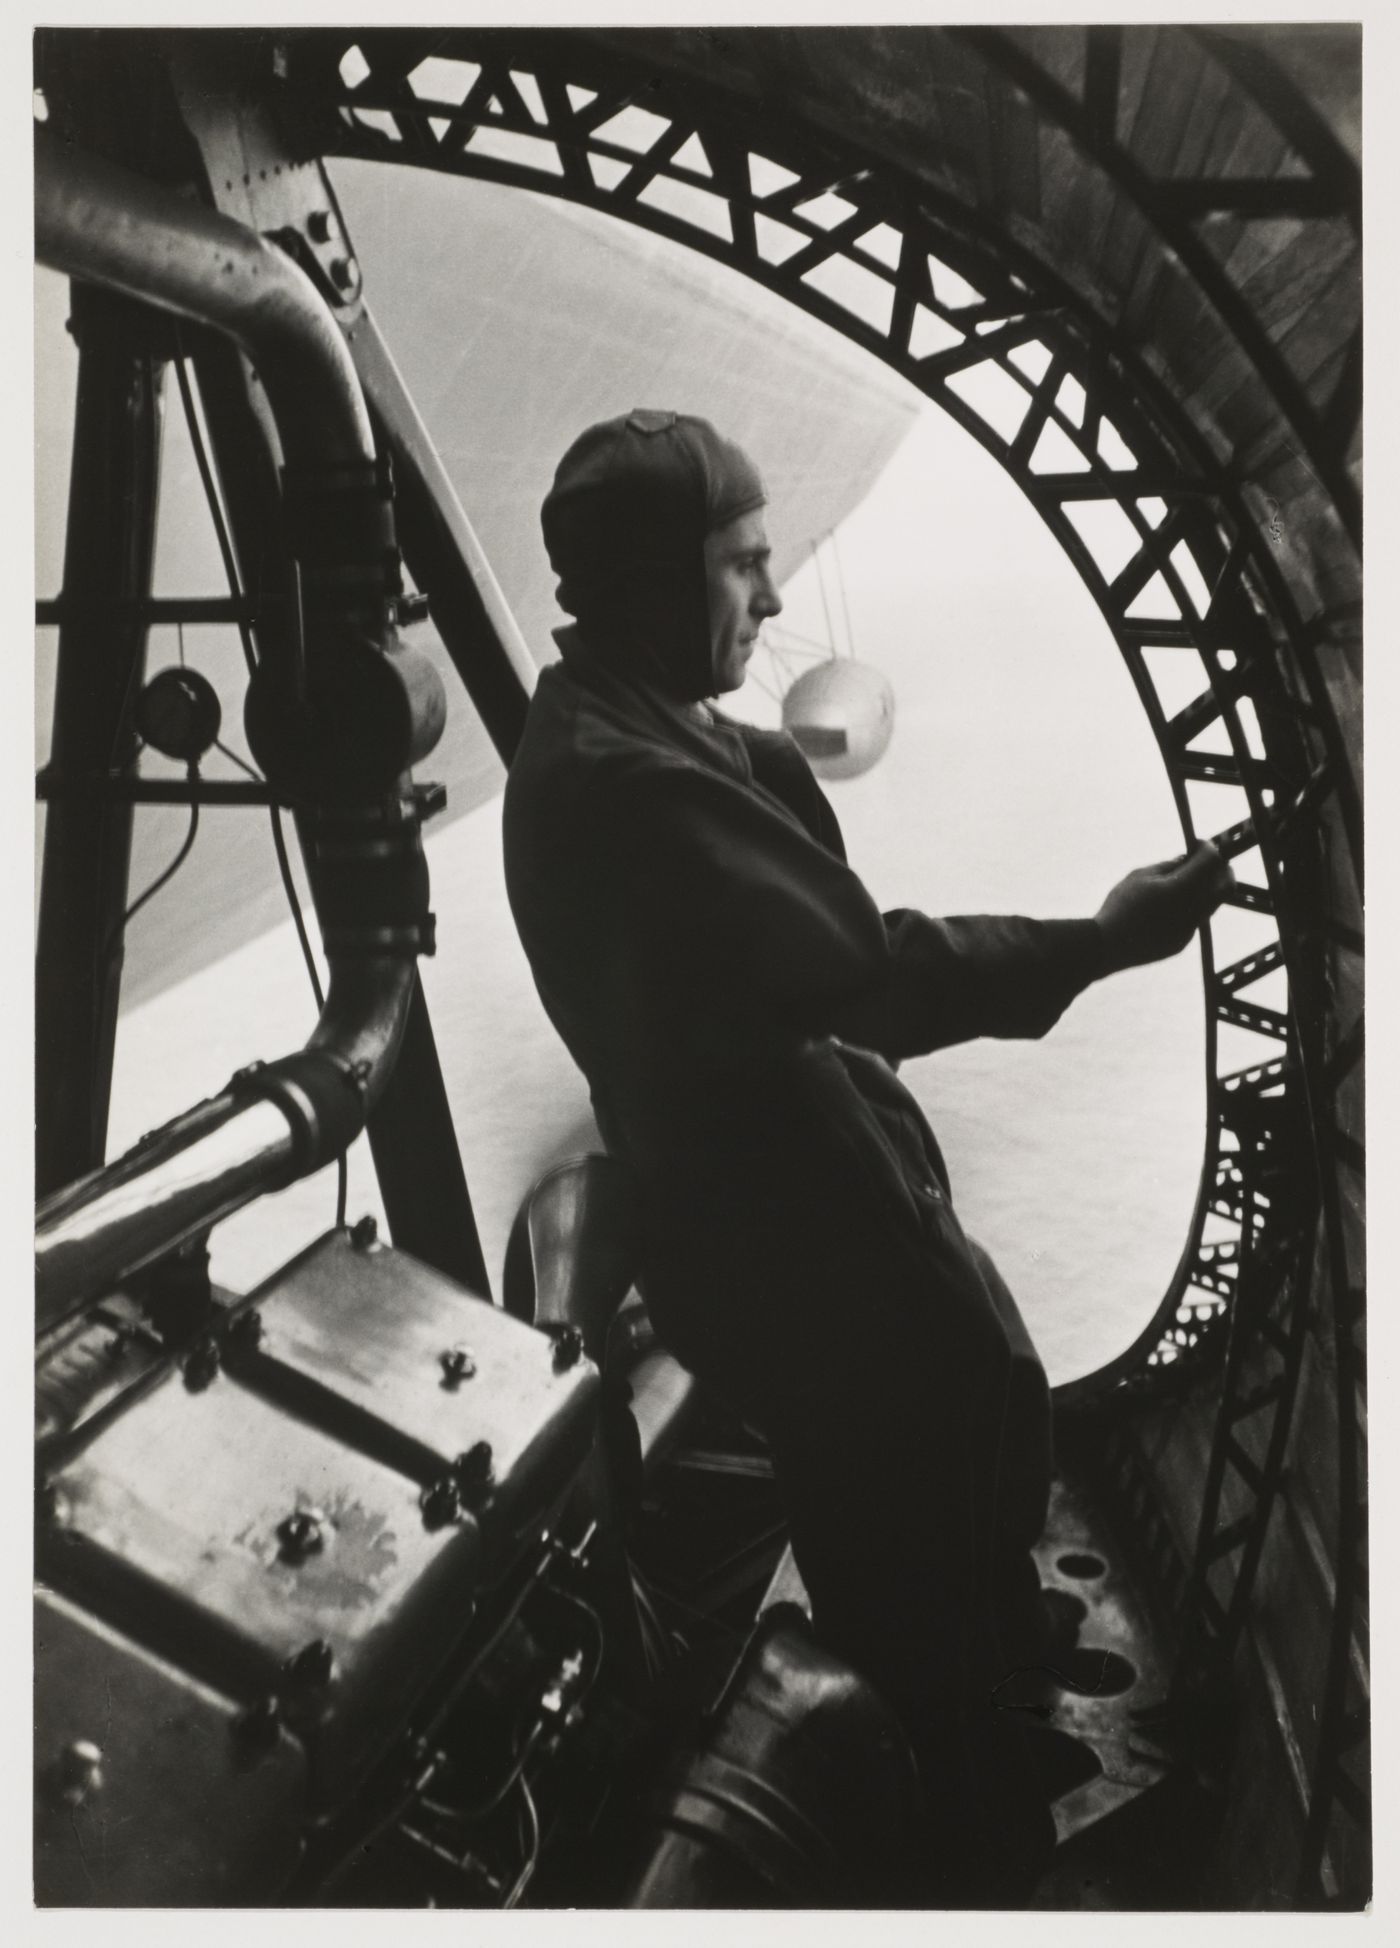 View of a zeppelin in flight from the rear propellor duct with a technician verifying [?] the metal structure